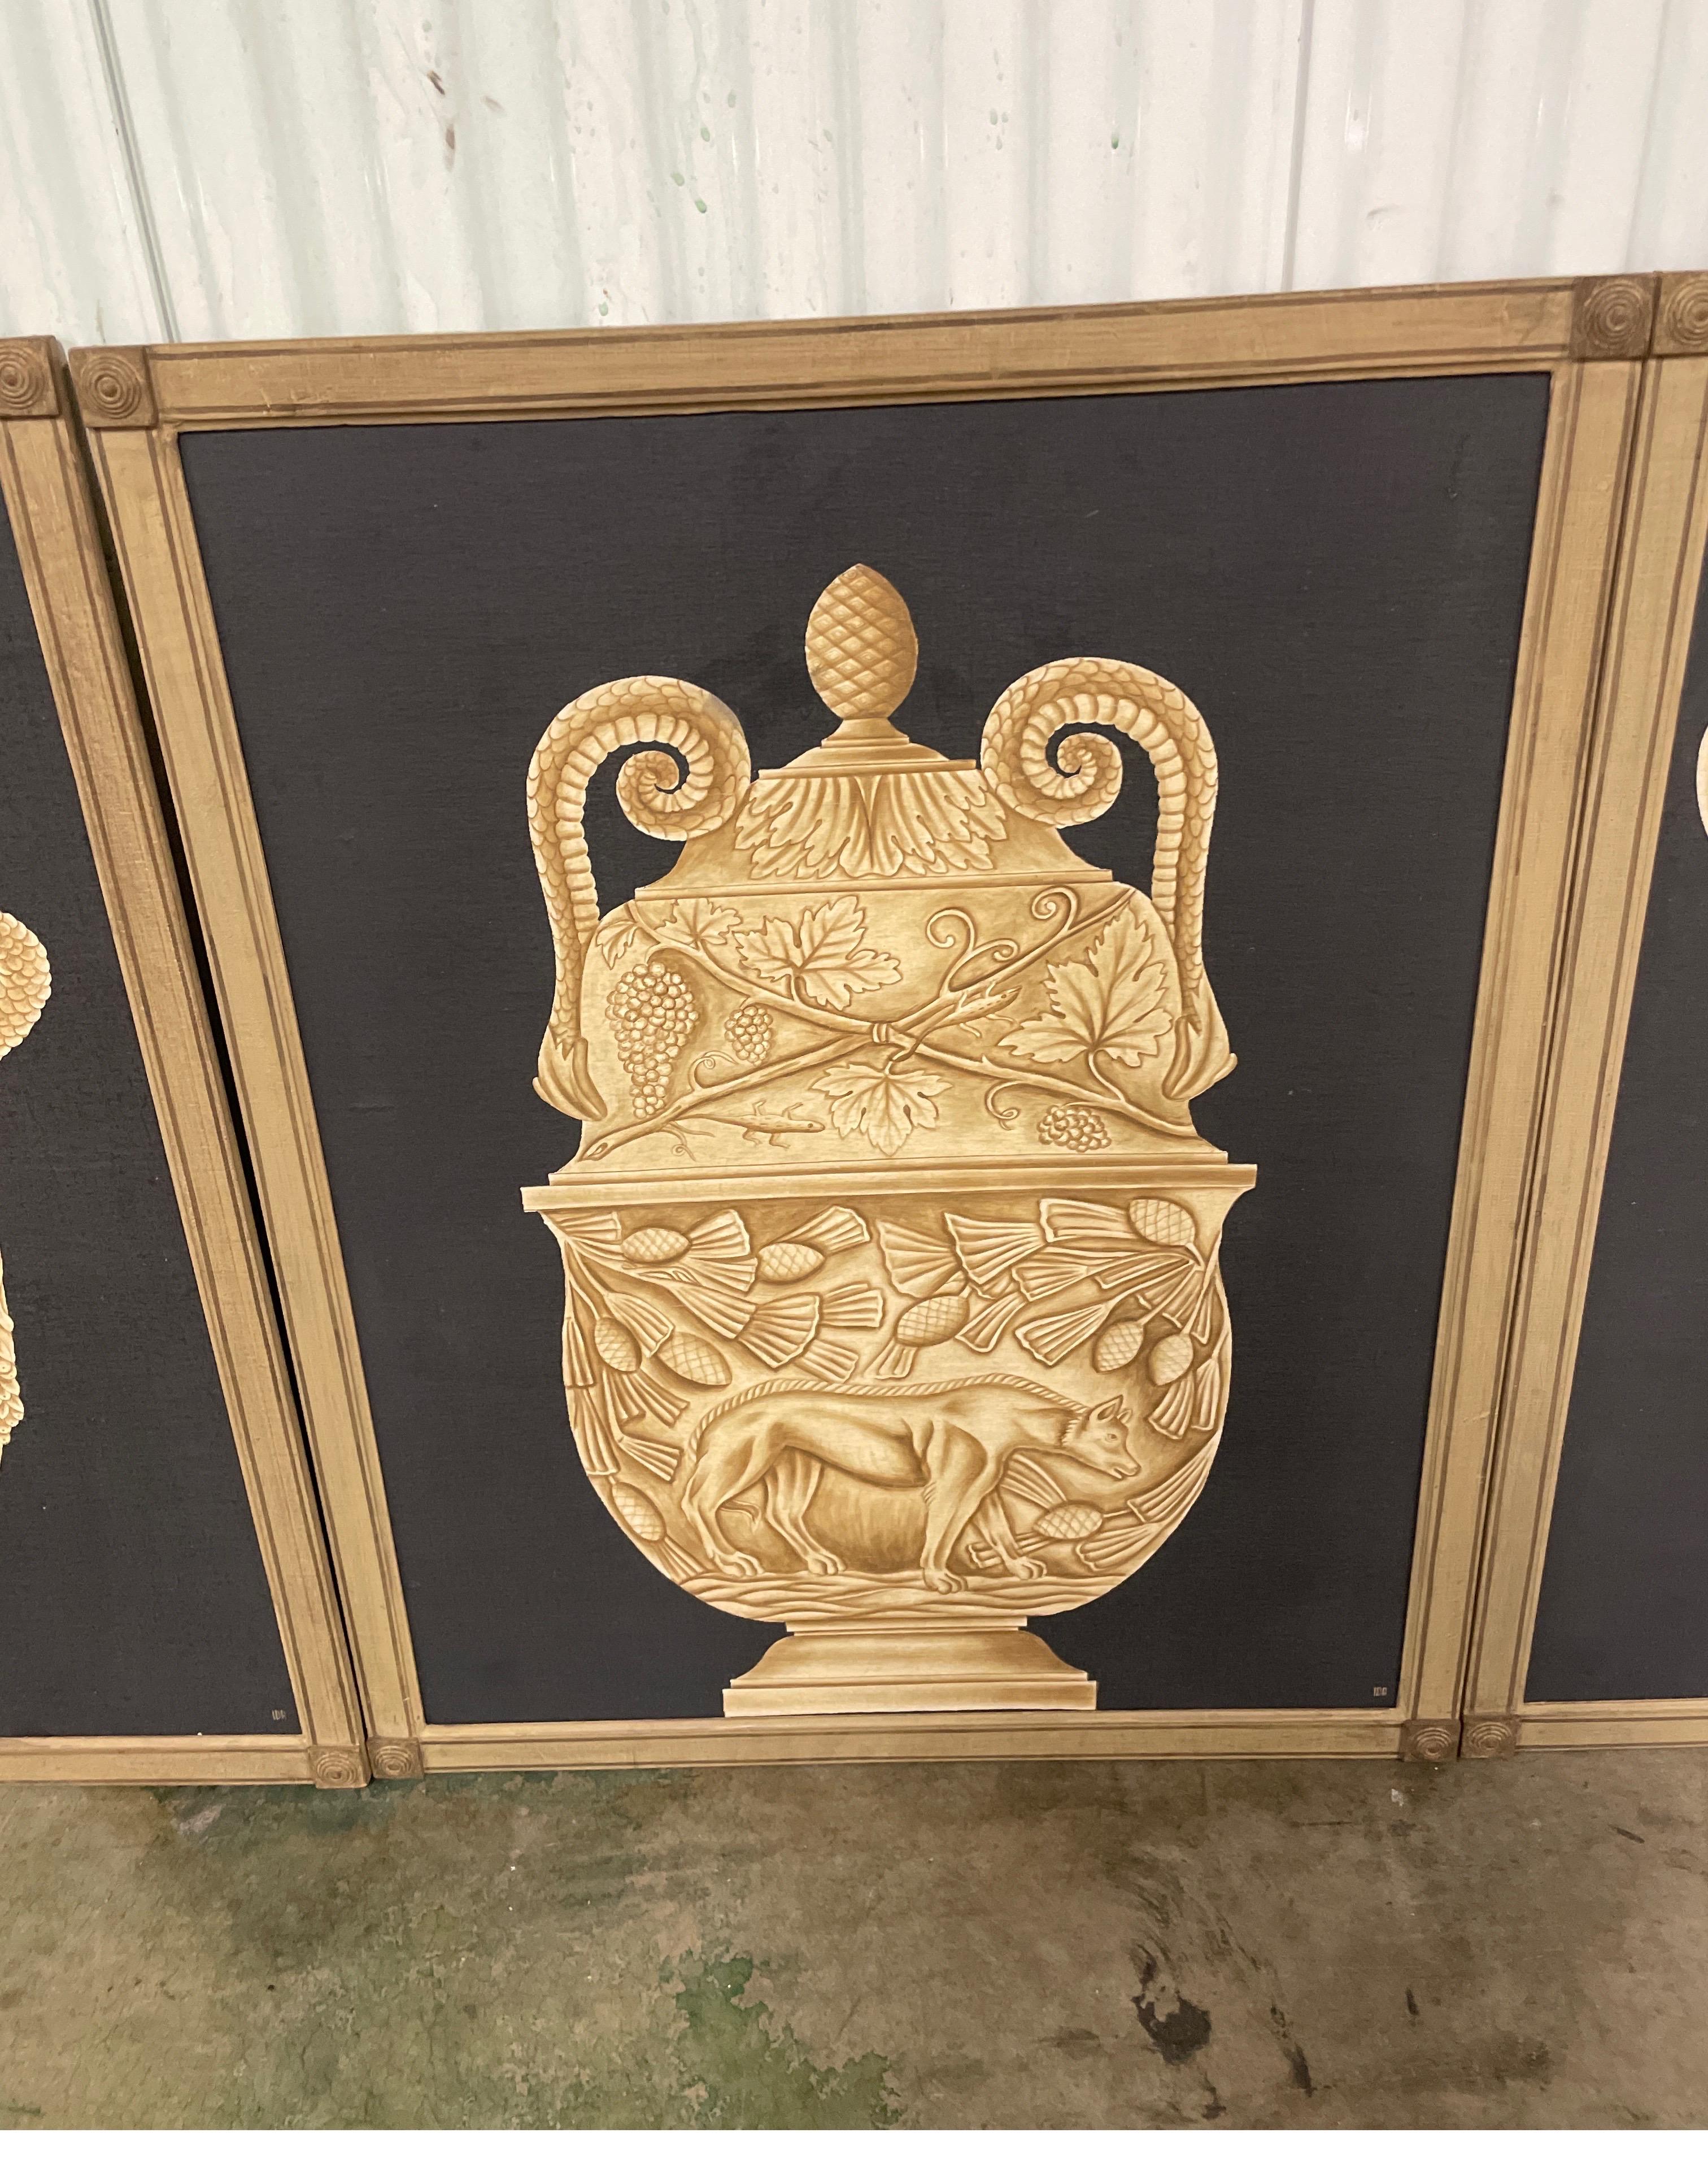 Set of Four Neoclassical Urn Wall Panels In Good Condition For Sale In West Palm Beach, FL